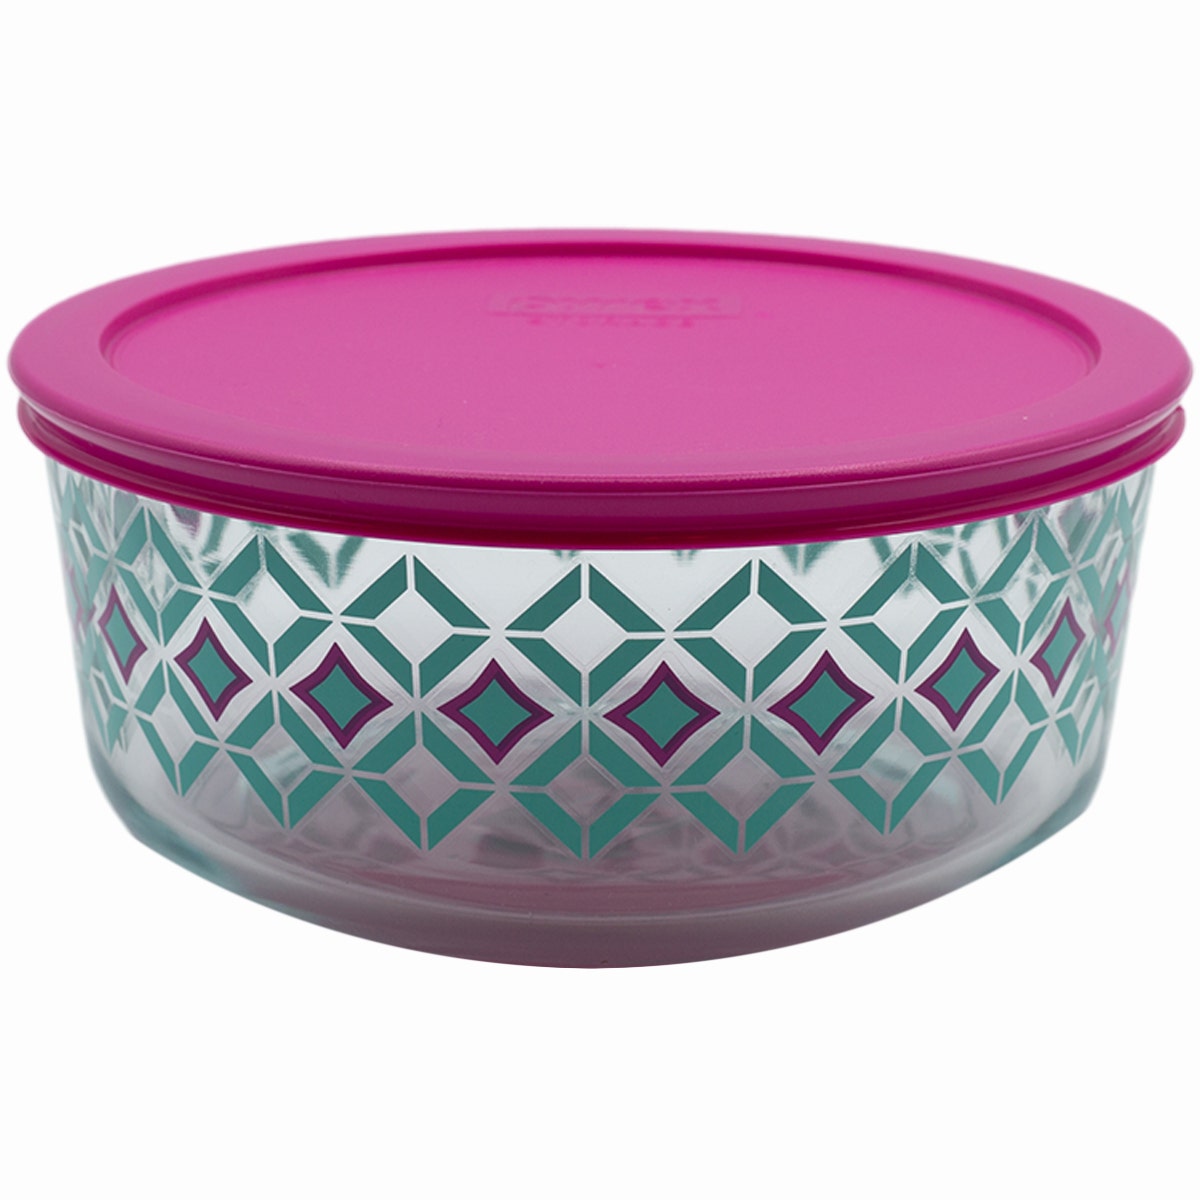 Rectangle Compartment Pyrex Glass Meal Box, glass bowl supplier